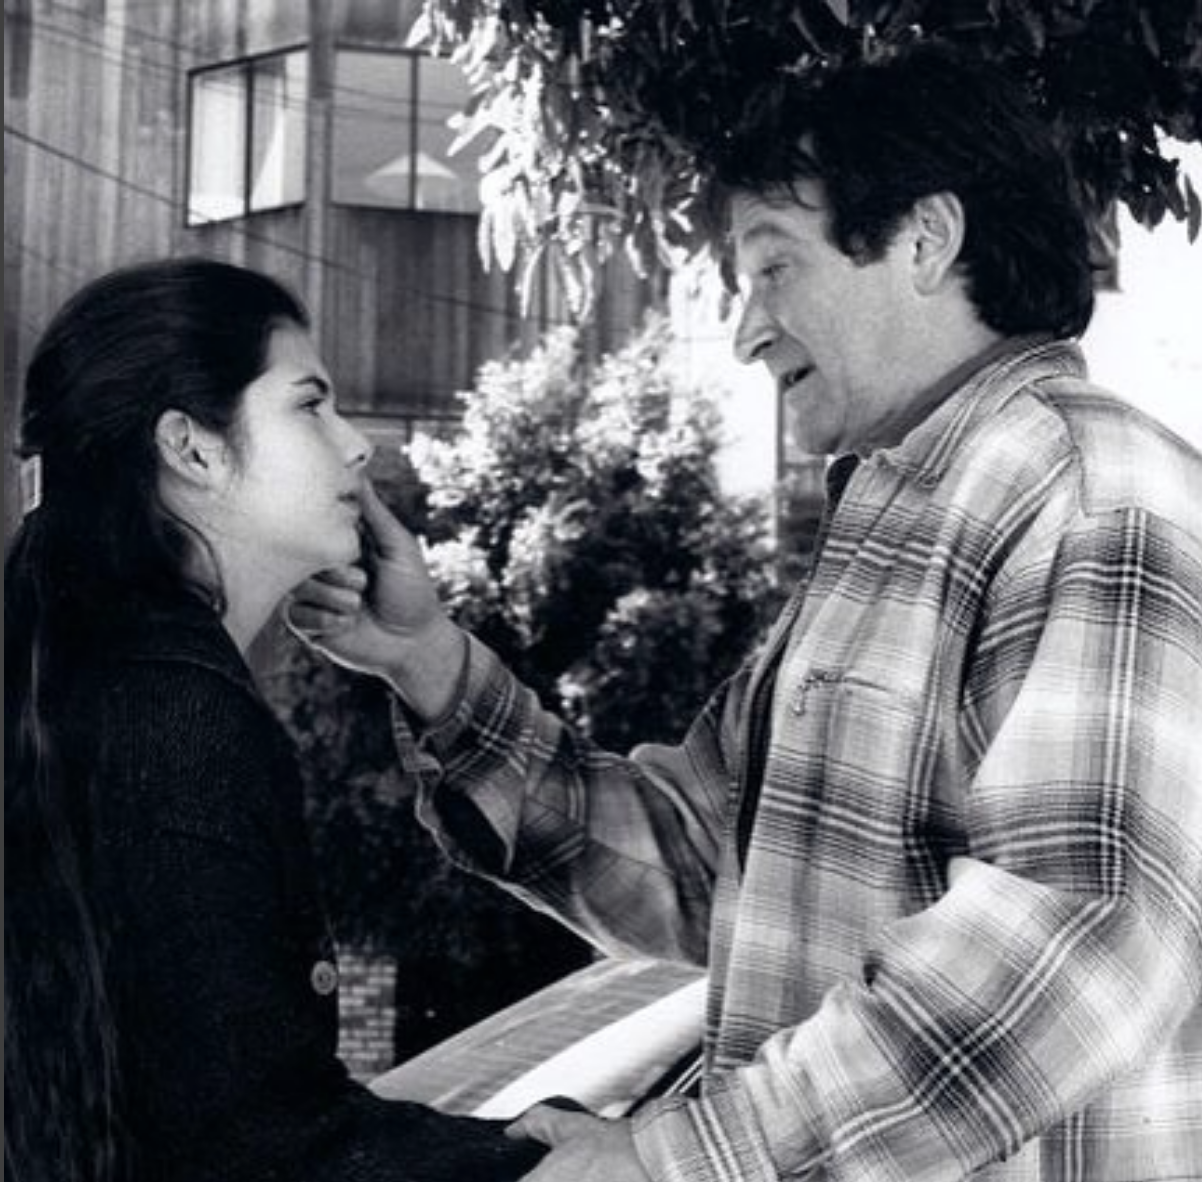 Lisa Jakub and Robin Williams from Mrs. Doubtfire. Lisa looks upset, Robin touches her face. 